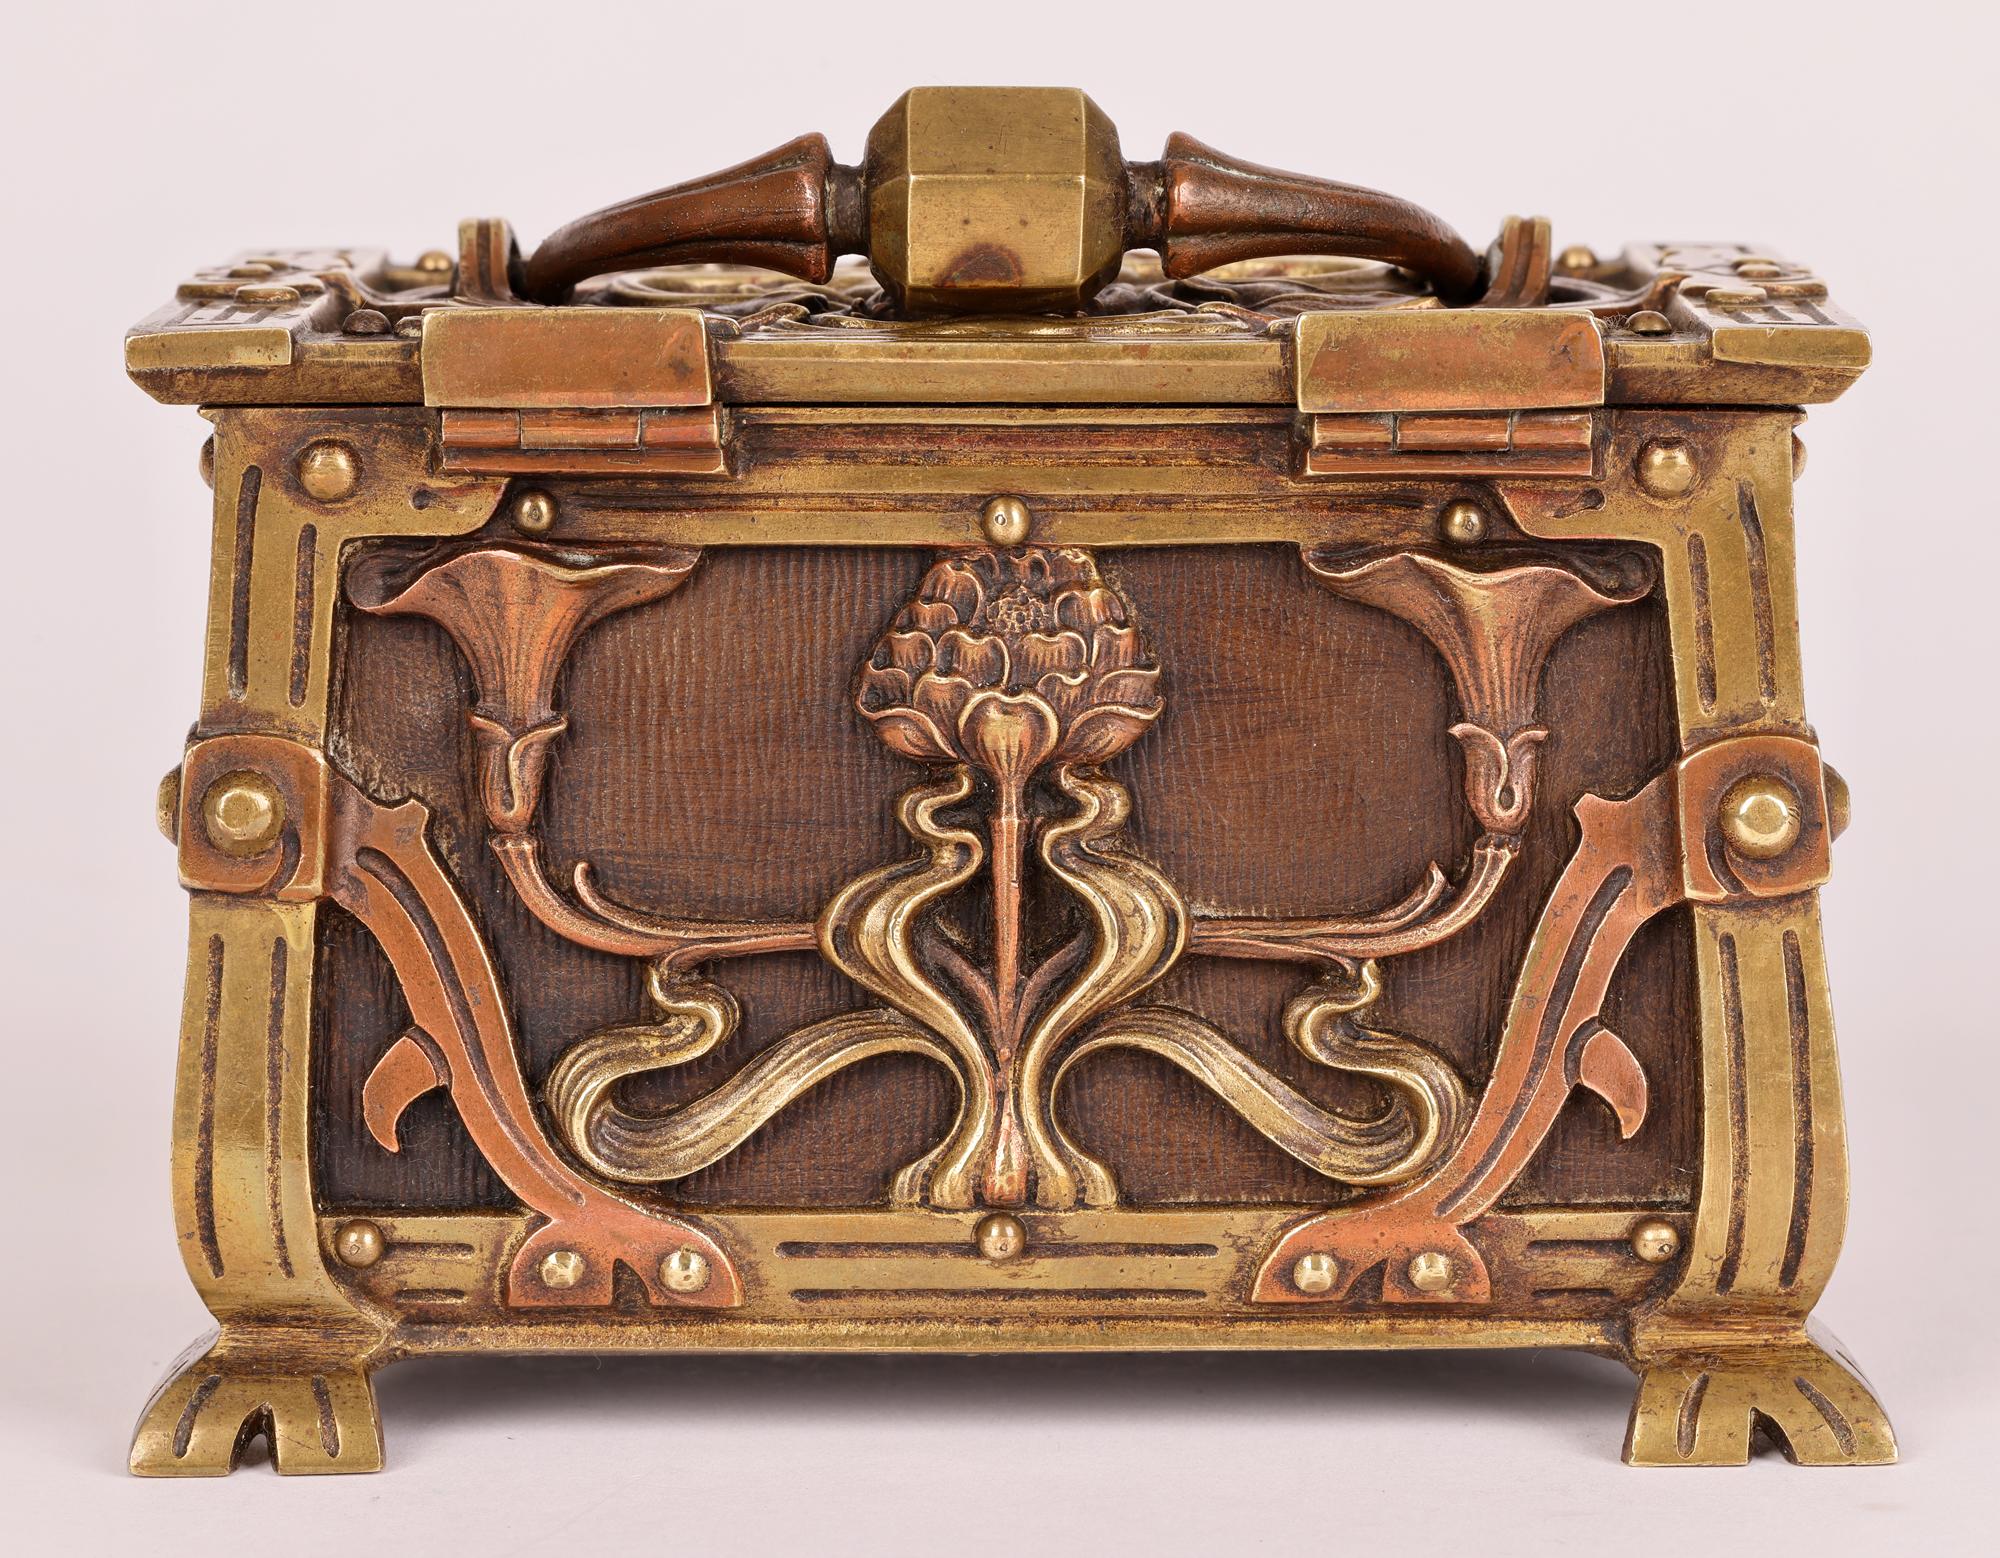 Hand-Crafted Art Nouveau Exceptional Continental Lidded Brass Casket with Maiden For Sale